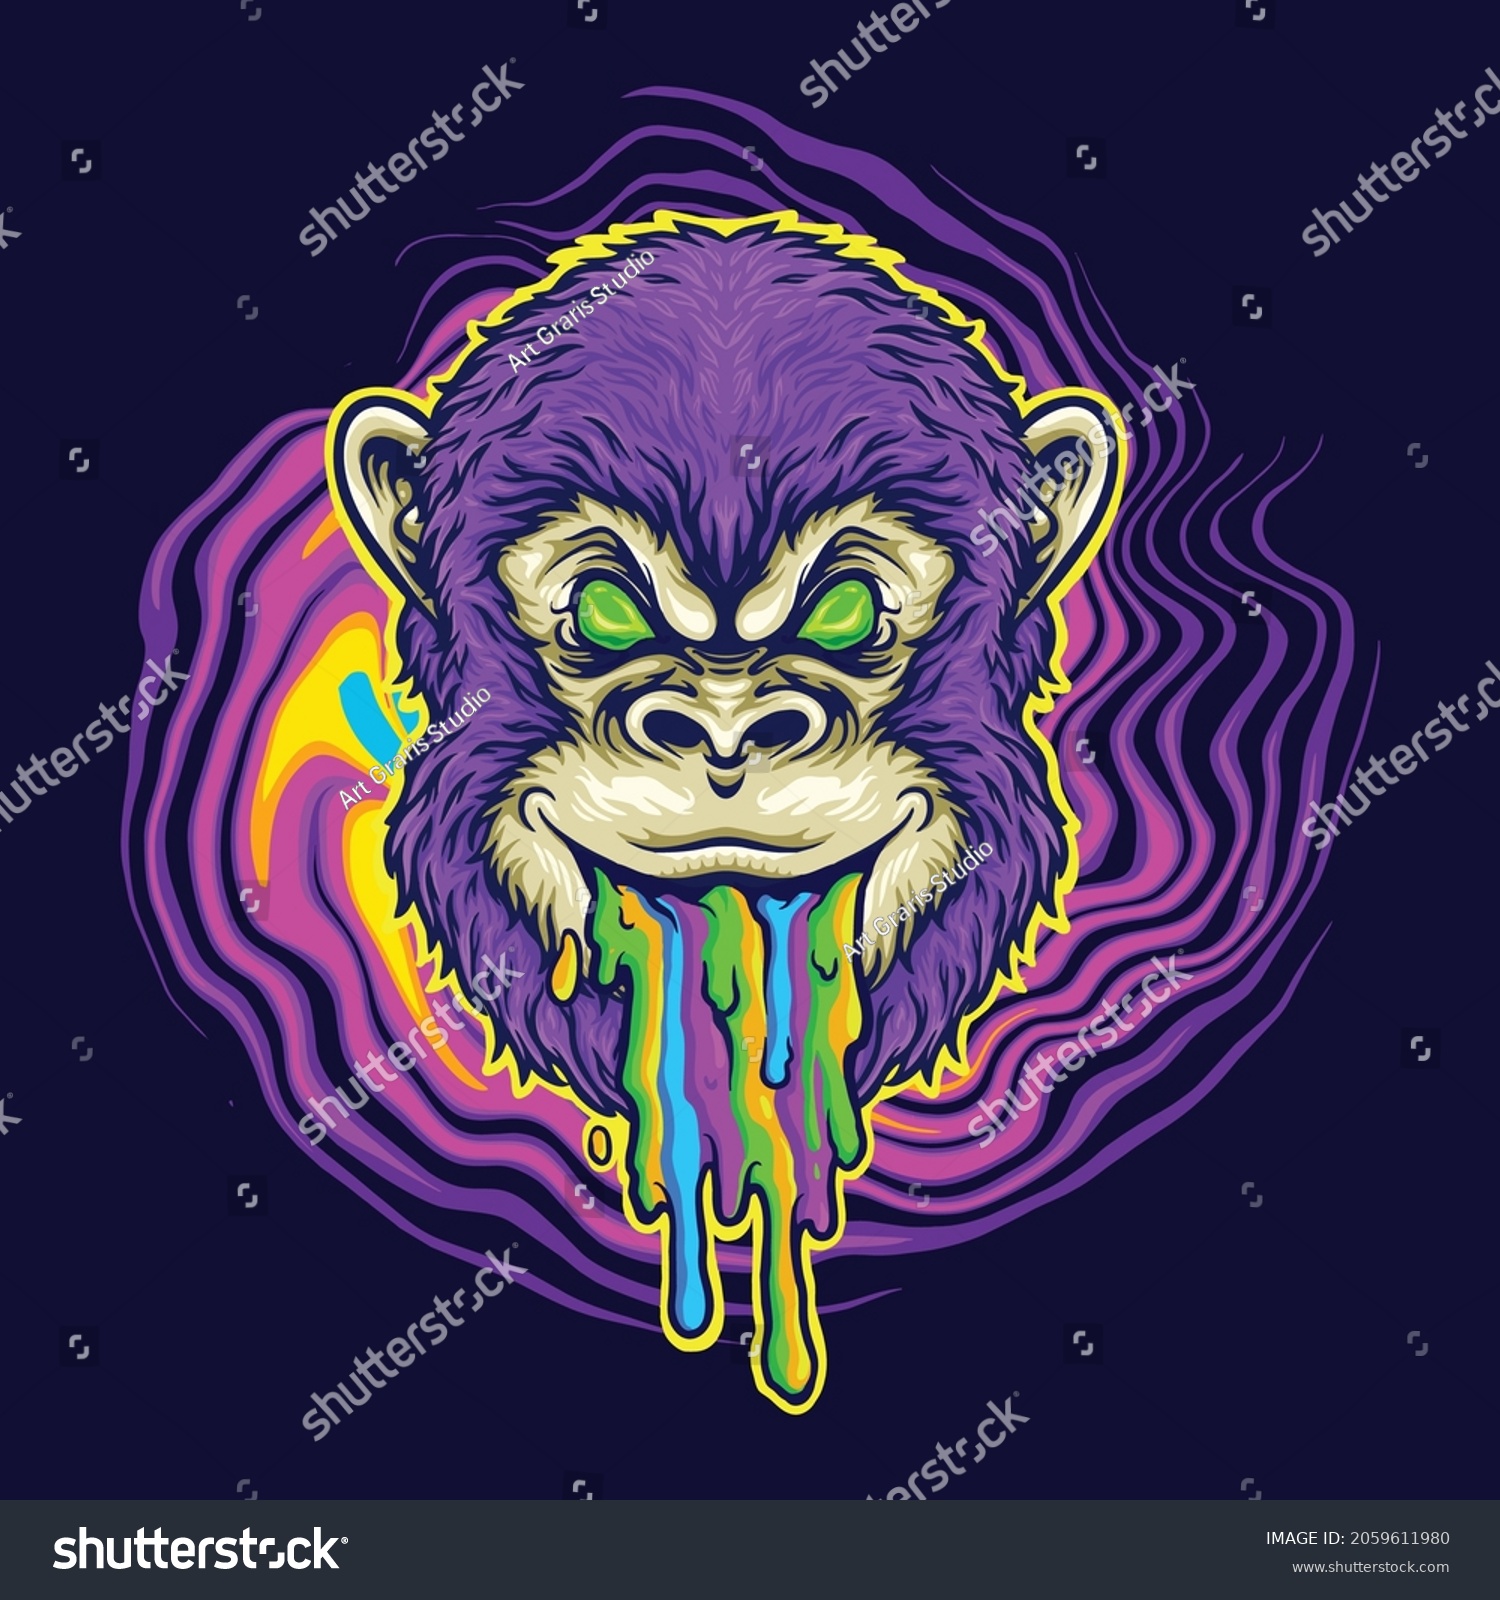 SVG of Monkey Trippy Psychedelic Vector illustrations for your work Logo, mascot merchandise t-shirt, stickers and Label designs, poster, greeting cards advertising business company or brands. svg